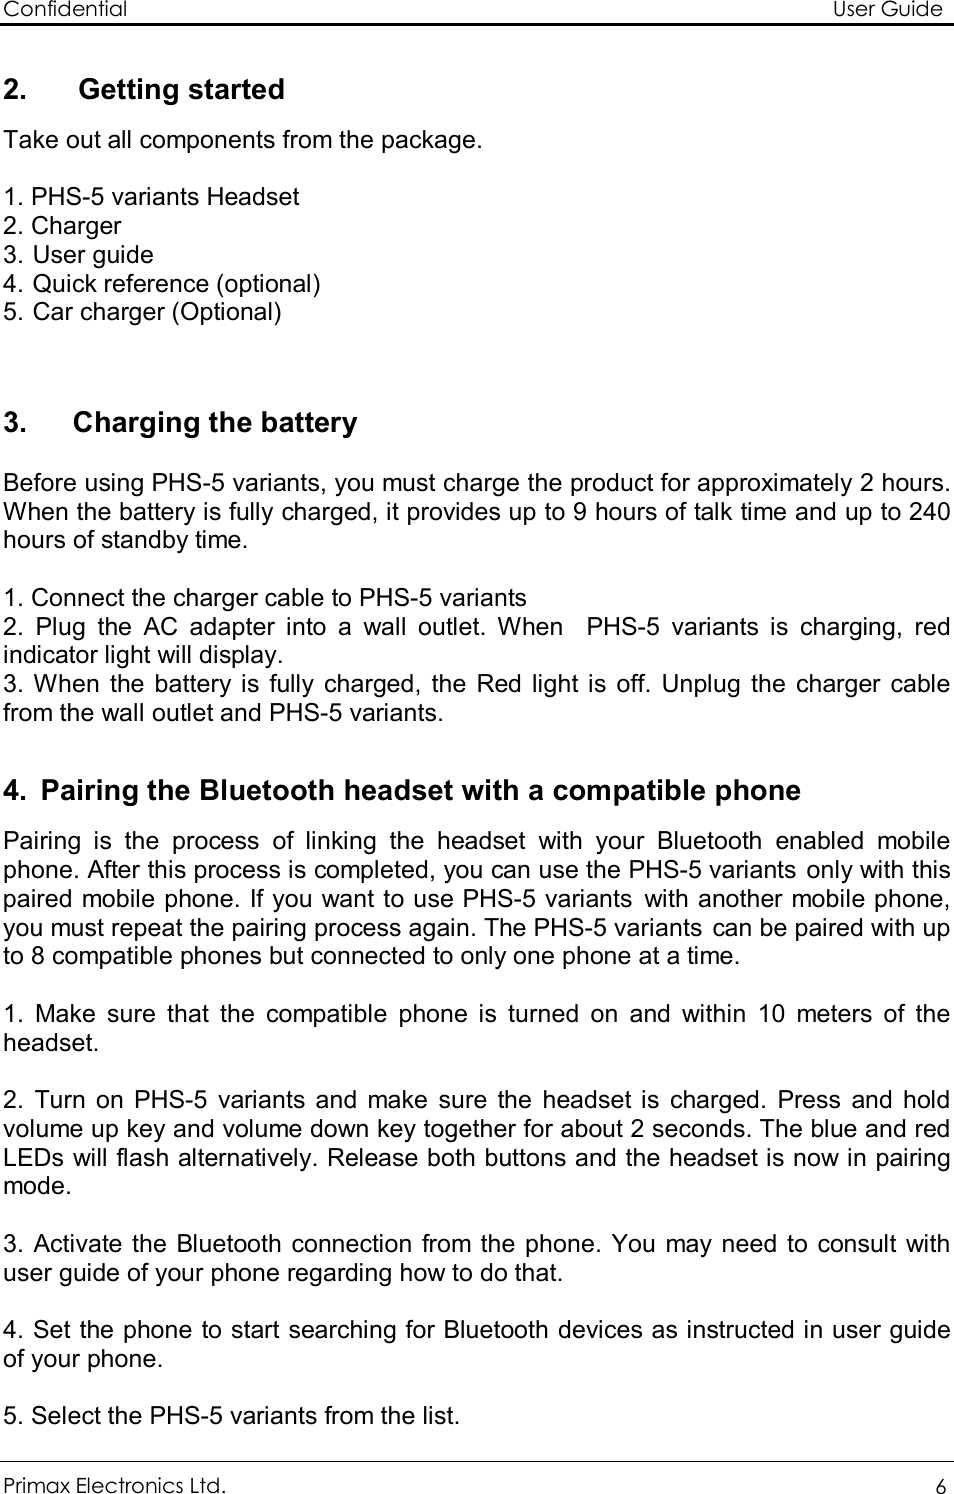 Confidential                                                                                                          User Guide Primax Electronics Ltd.  6  2. Getting started Take out all components from the package.  1. PHS-5 variants Headset  2. Charger 3.  User guide 4.  Quick reference (optional) 5.  Car charger (Optional)   3.     Charging the battery  Before using PHS-5 variants, you must charge the product for approximately 2 hours. When the battery is fully charged, it provides up to 9 hours of talk time and up to 240 hours of standby time.  1. Connect the charger cable to PHS-5 variants 2. Plug the AC adapter into a wall outlet. When  PHS-5 variants is charging, red indicator light will display. 3. When the battery is fully charged, the Red light is off. Unplug the charger cable from the wall outlet and PHS-5 variants.  4. Pairing the Bluetooth headset with a compatible phone Pairing is the process of linking the headset with your Bluetooth enabled mobile phone. After this process is completed, you can use the PHS-5 variants only with this paired mobile phone. If you want to use PHS-5 variants with another mobile phone, you must repeat the pairing process again. The PHS-5 variants can be paired with up to 8 compatible phones but connected to only one phone at a time.  1. Make sure that the compatible phone is turned on and within 10 meters of the headset.  2. Turn on PHS-5 variants and make sure the headset is charged. Press and hold volume up key and volume down key together for about 2 seconds. The blue and red LEDs will flash alternatively. Release both buttons and the headset is now in pairing mode.   3. Activate the Bluetooth connection from the phone. You may need to consult with  user guide of your phone regarding how to do that.  4. Set the phone to start searching for Bluetooth devices as instructed in user guide of your phone.  5. Select the PHS-5 variants from the list. 